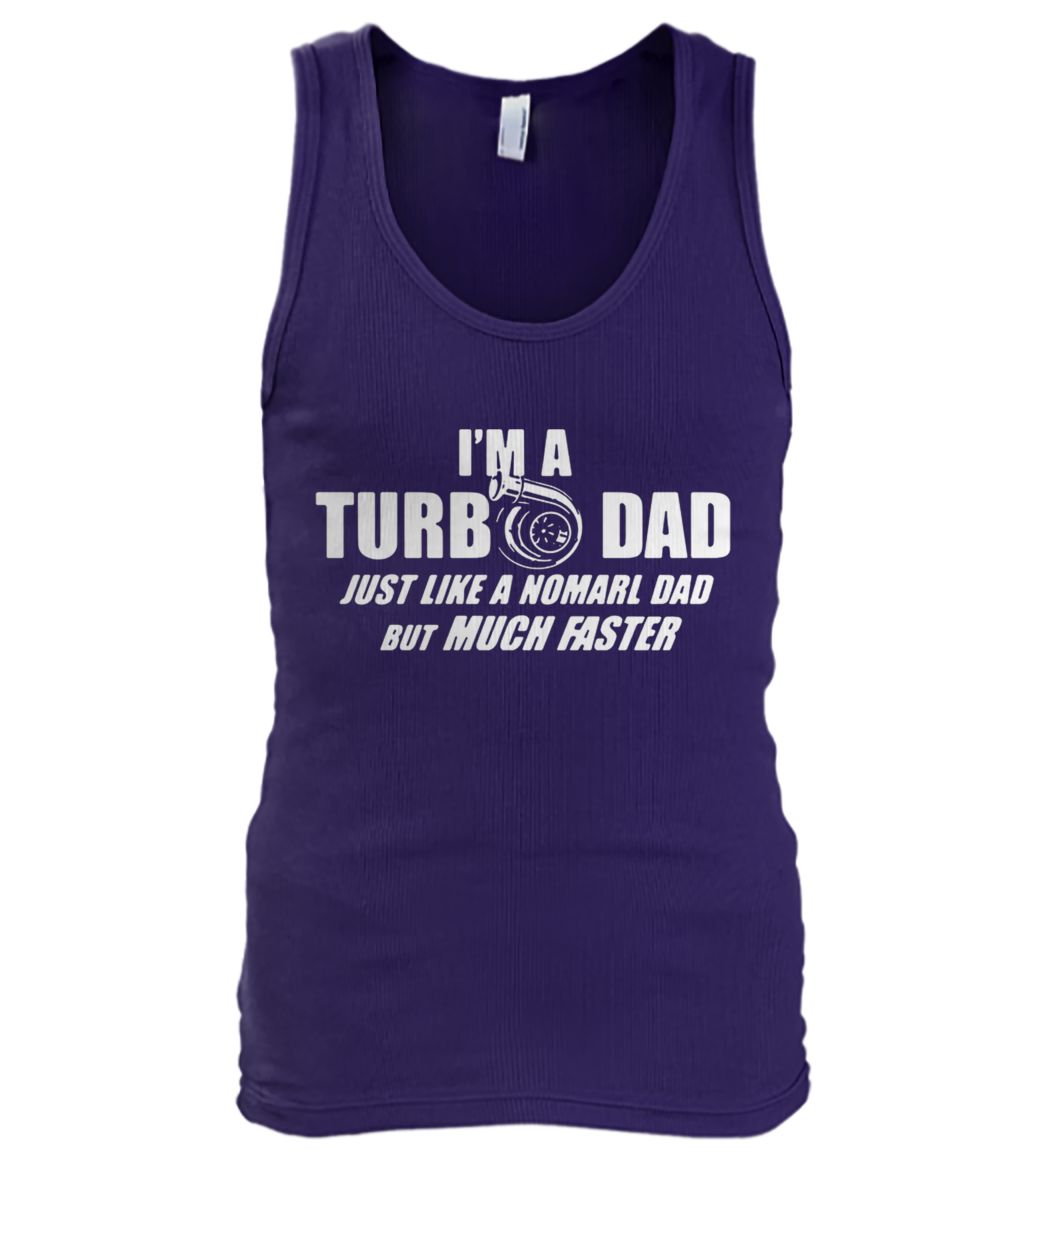 I'm a turbo dad just like a normal dad but much faster men's tank top